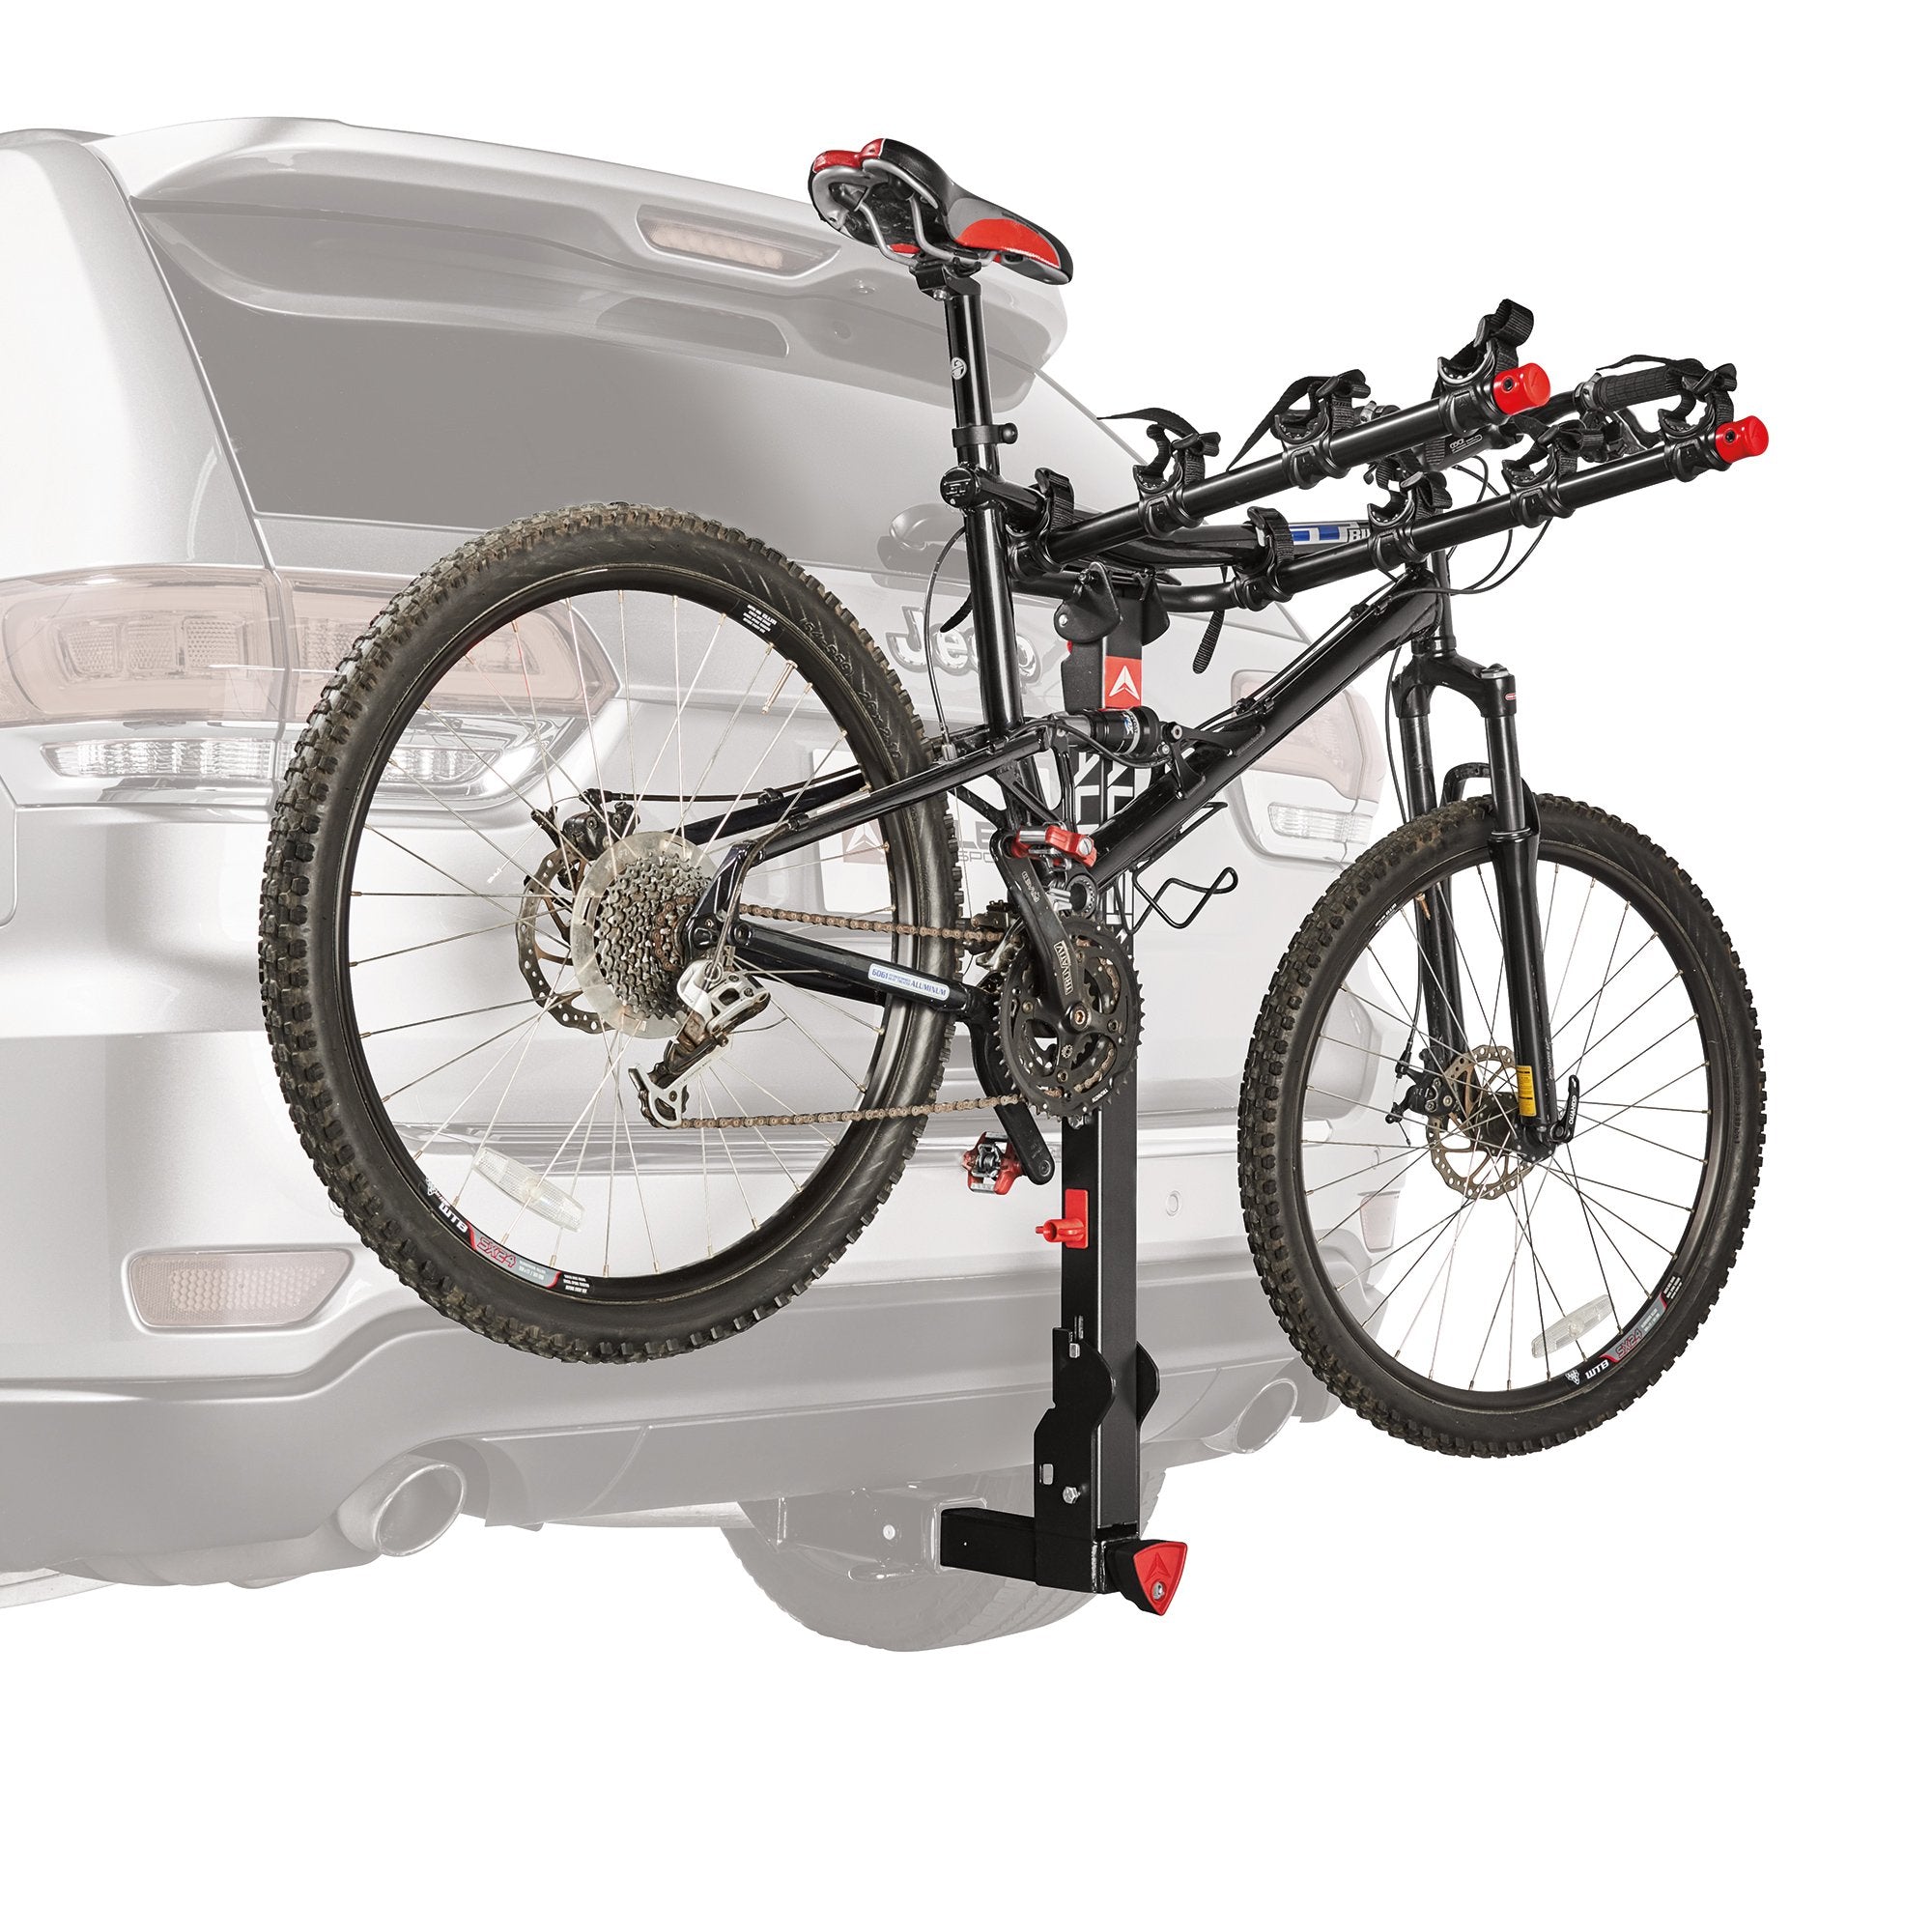 Tow Ball Mounting Bicycle Rack – 4 bike Carrier (Tilt) – The